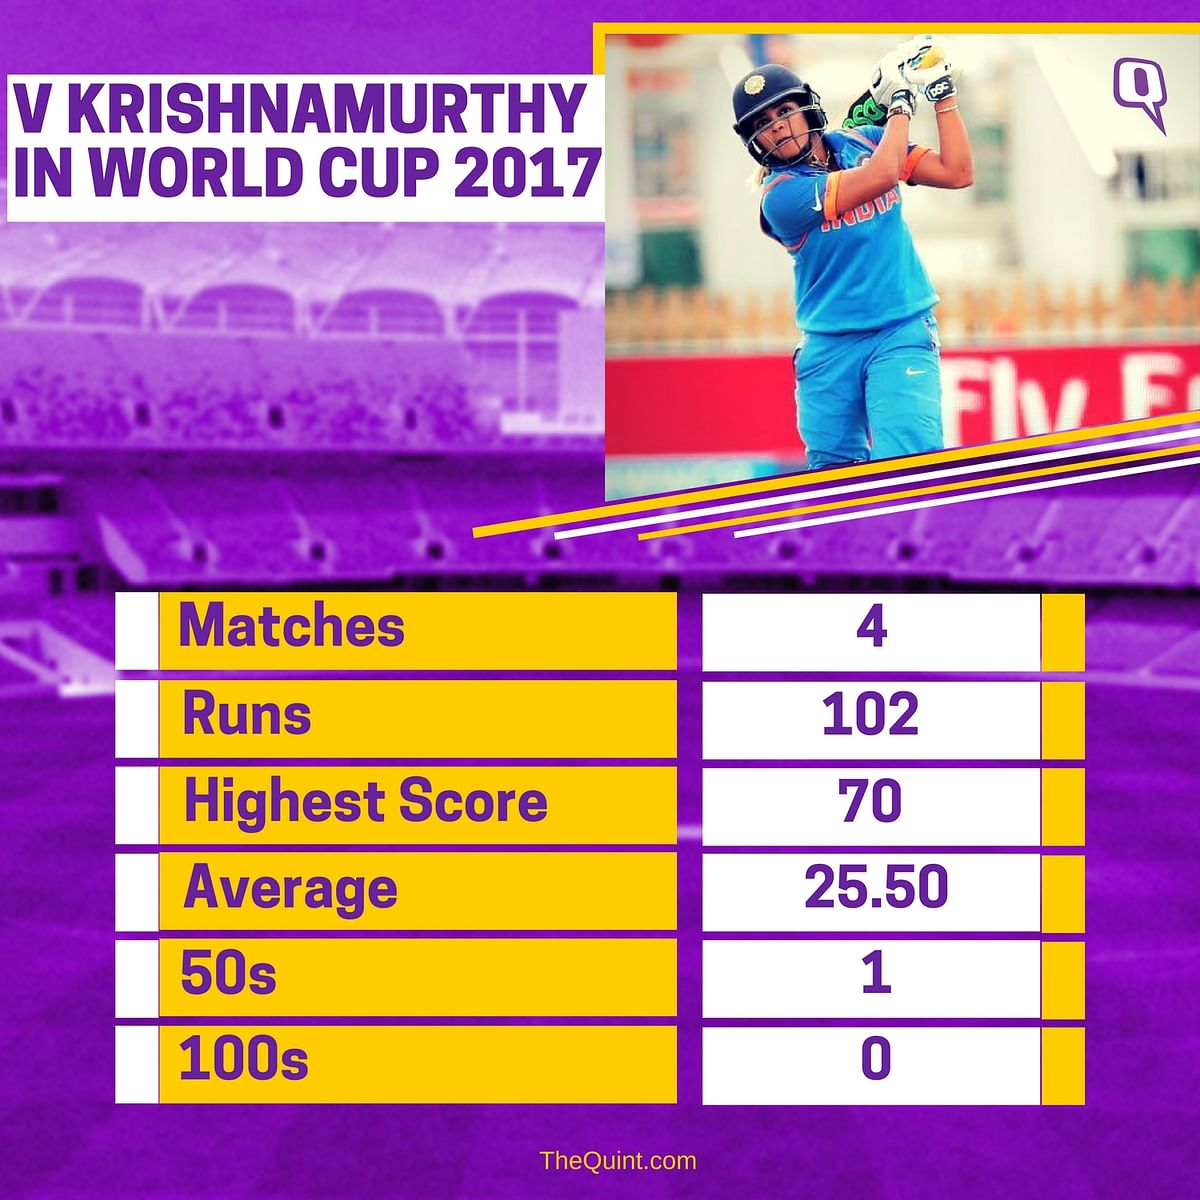 Here’s a look at the five key players for India ahead of the World Cup semi-final against Australia.